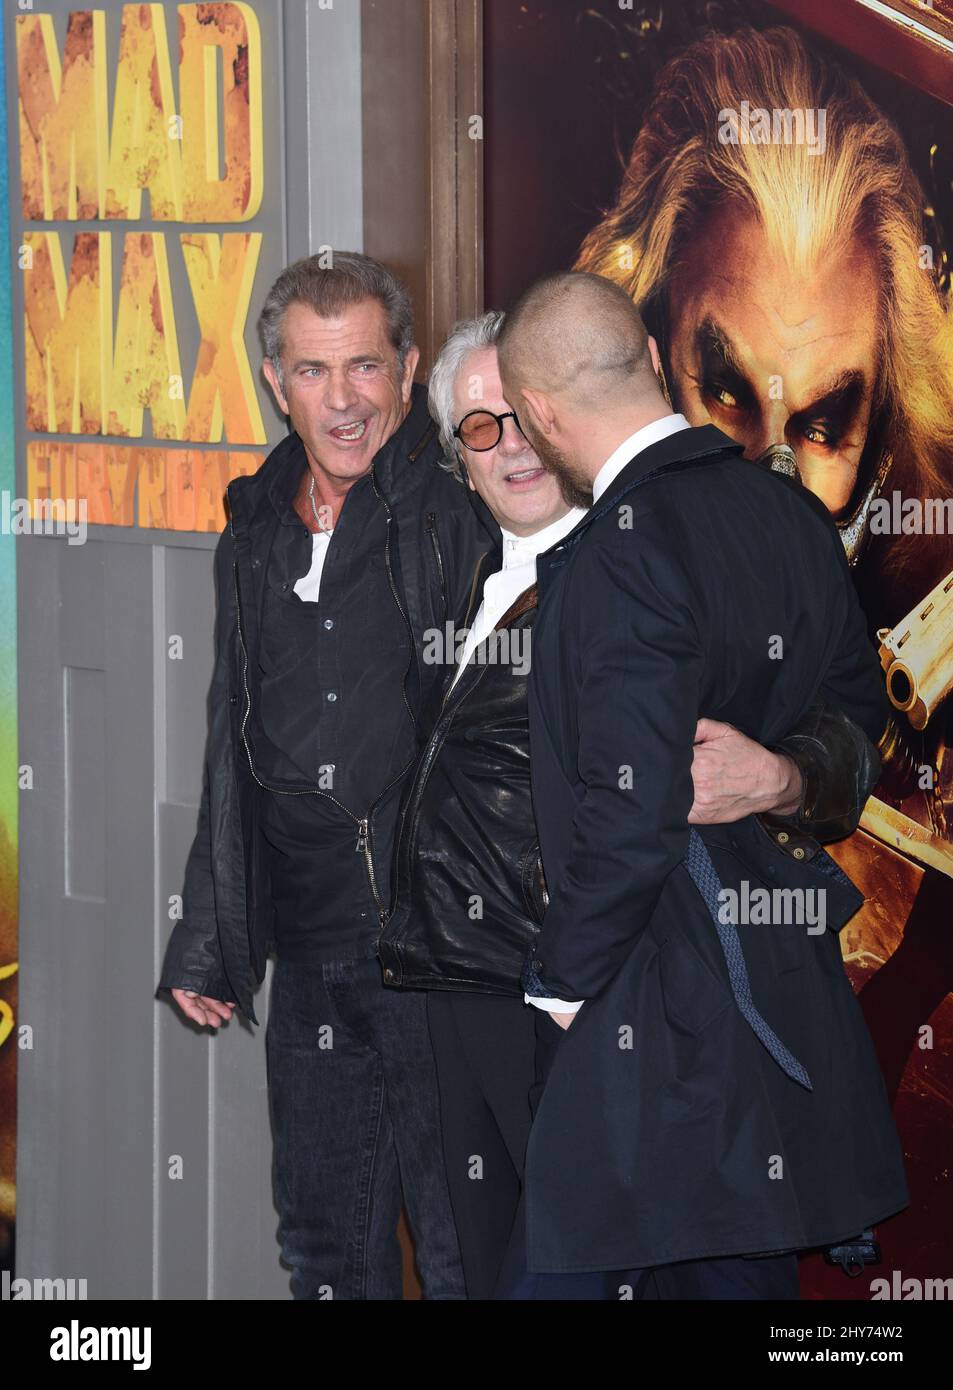 George Miller, Tom Hardy and Mel Gibson attends 'Mad Max:Fury Road' premiere held at the TCL Chinese Theatre Stock Photo